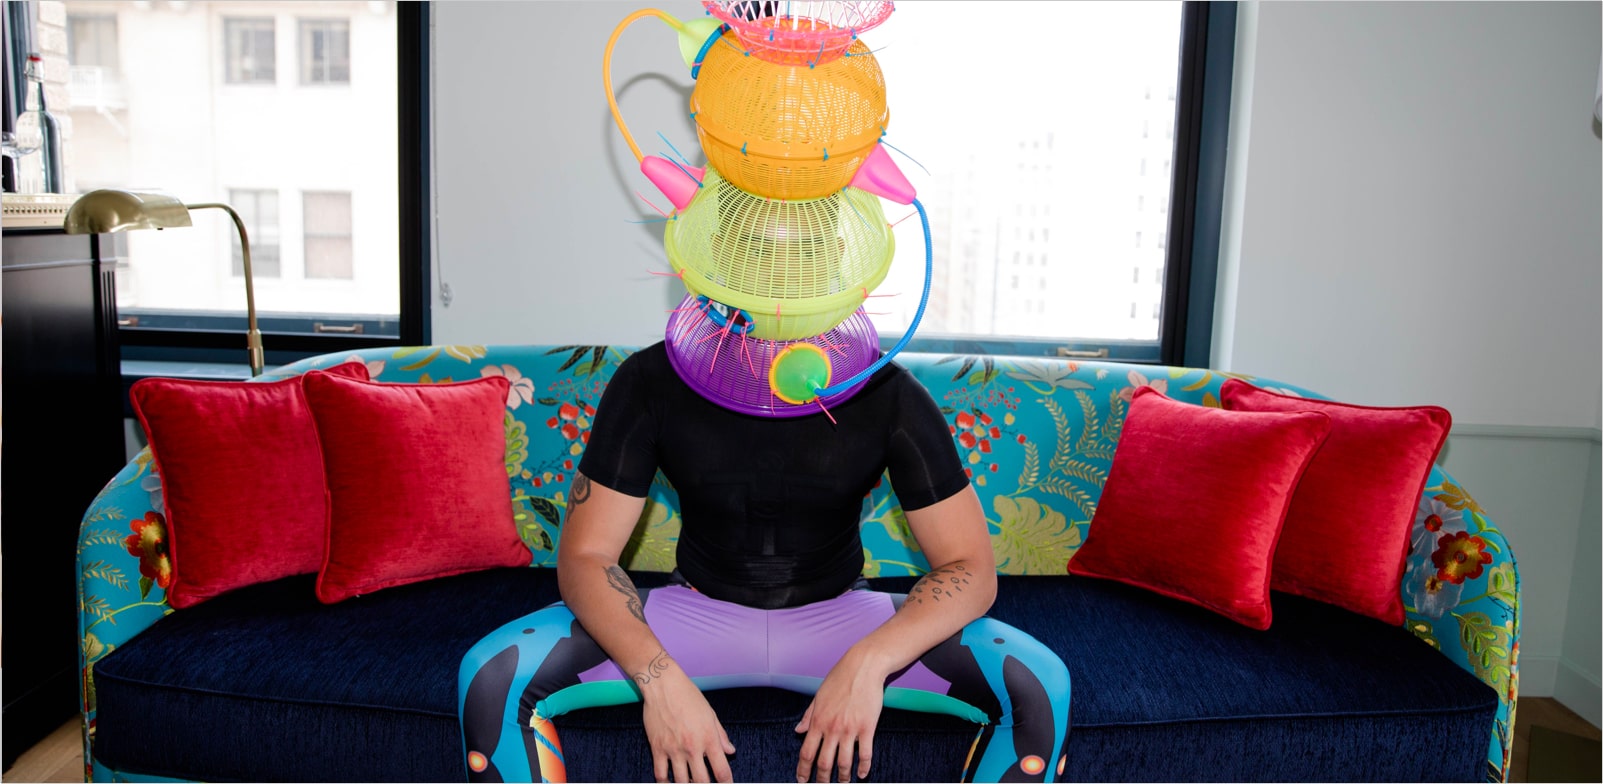 Gentleman sitting on a couch wearing colorful pants with a sculpture on his head